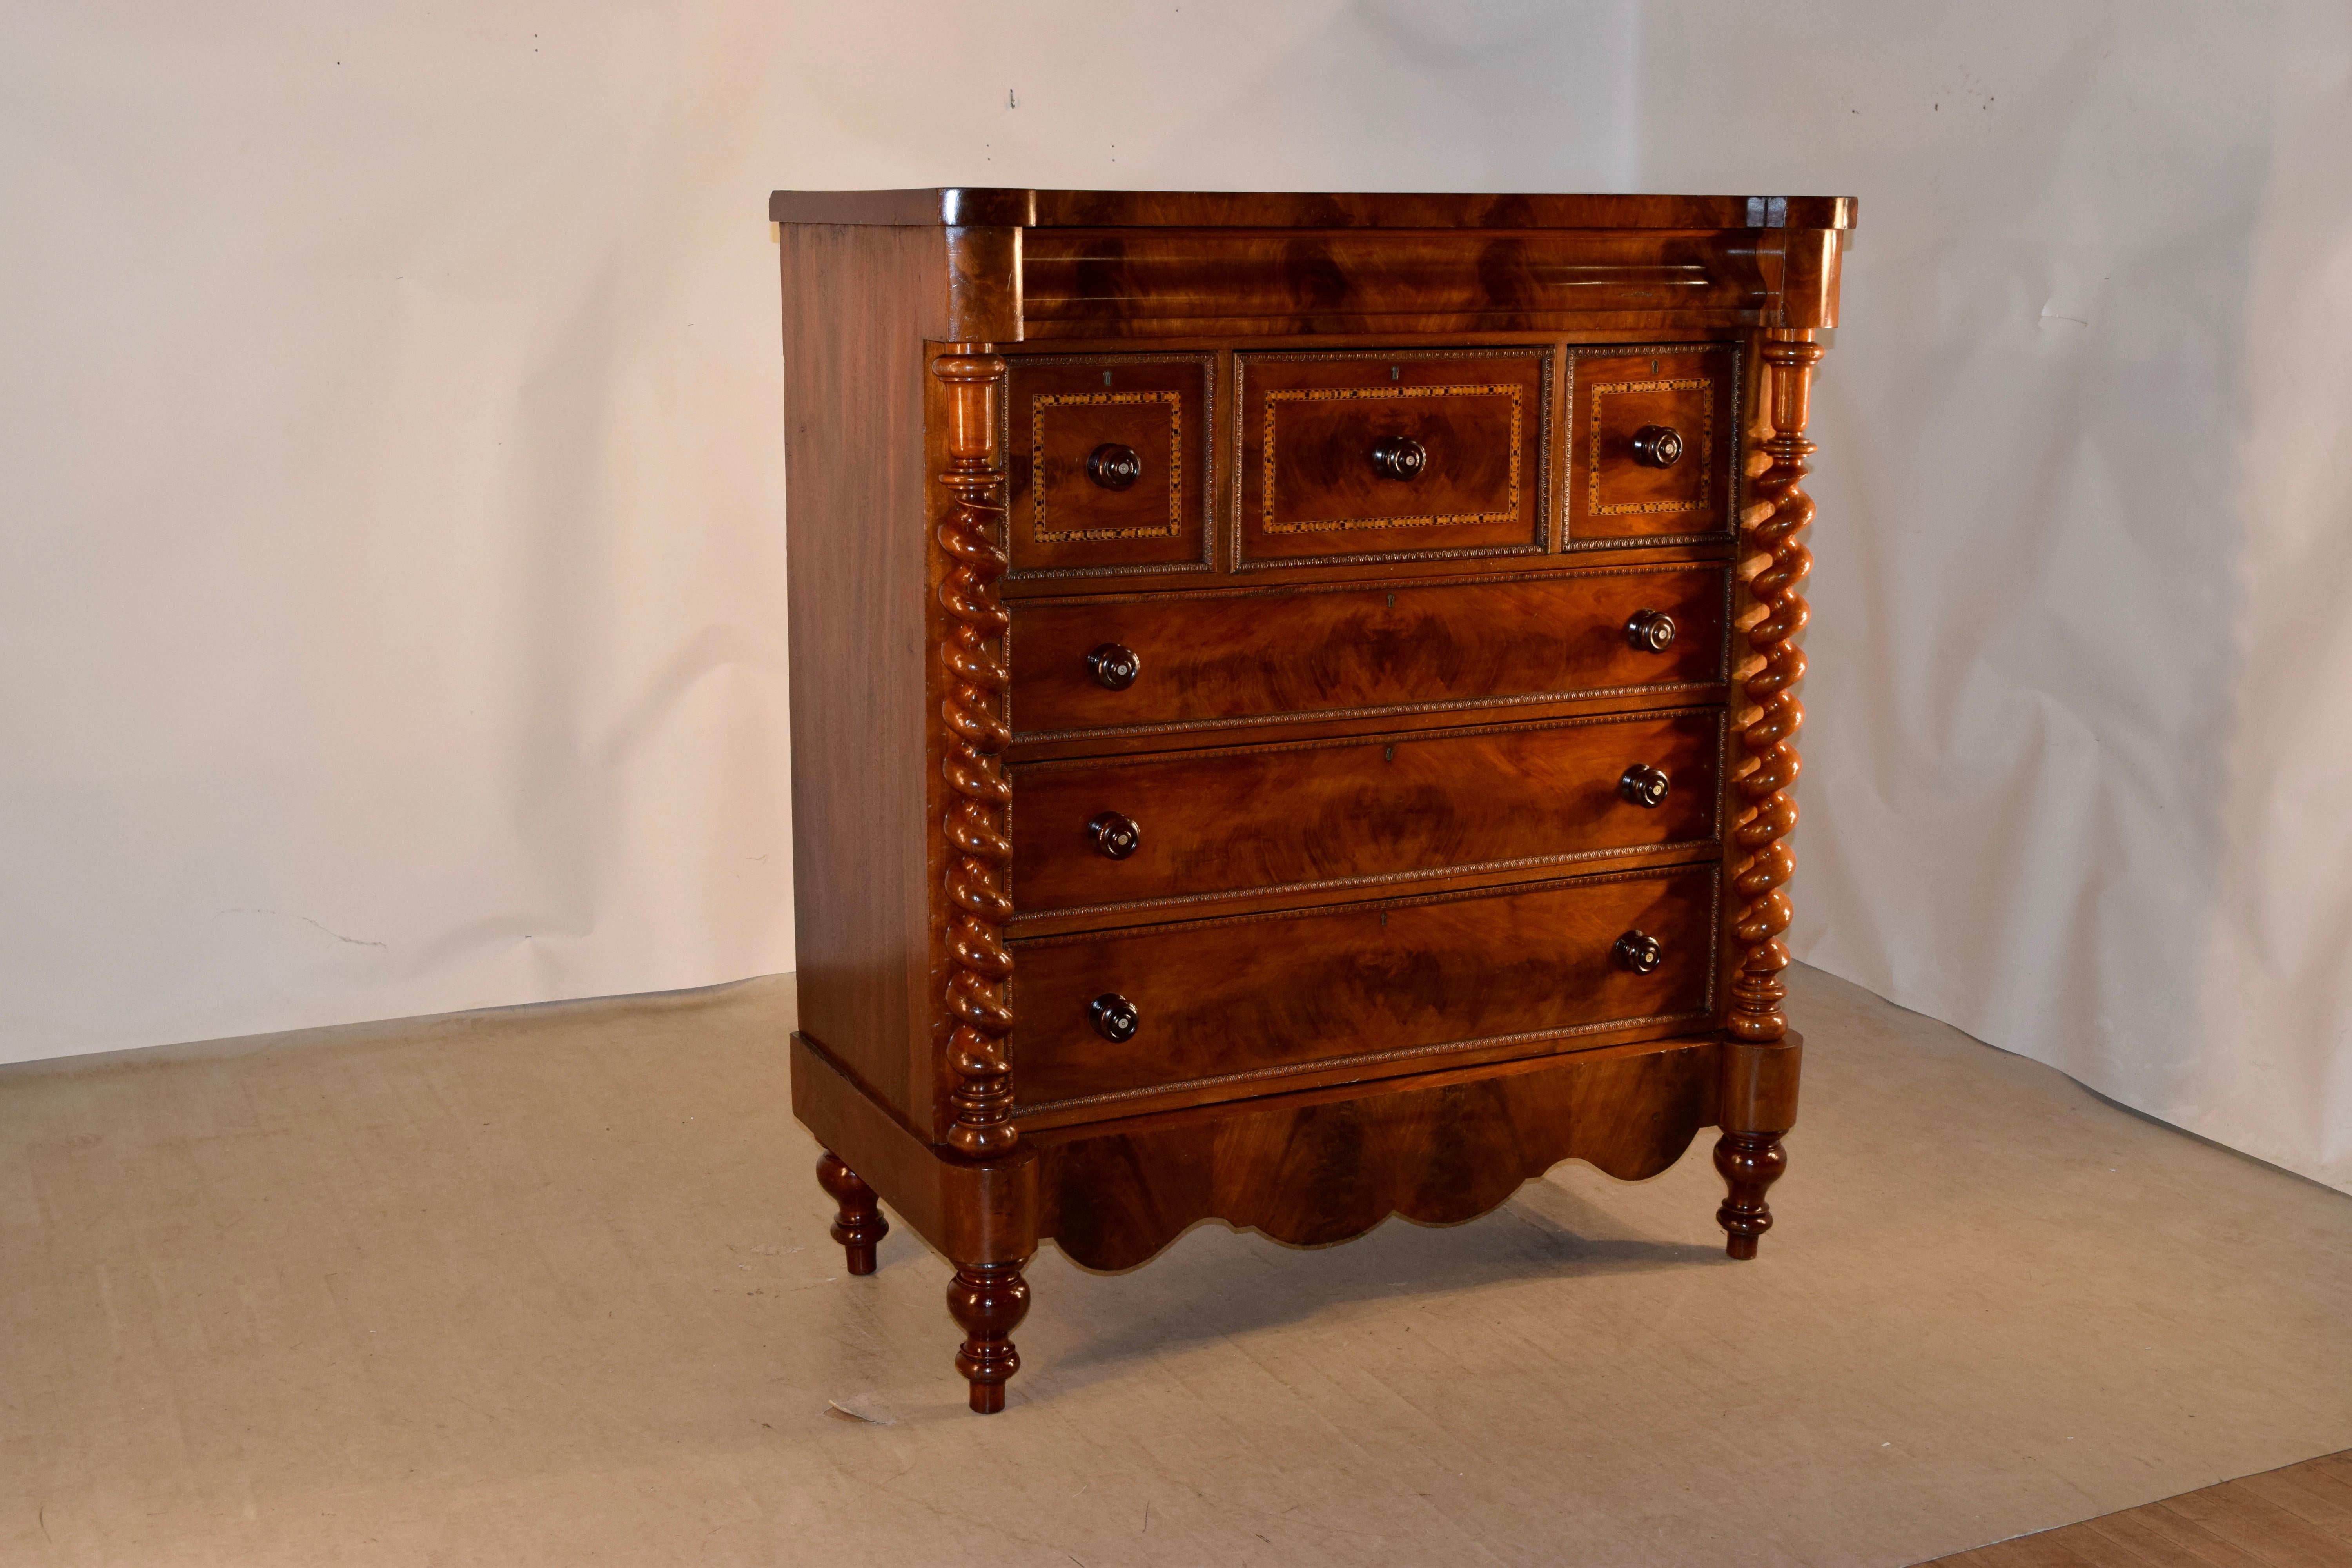 19th century large mahogany chest of drawers from England with a shaped top, following down to beautifully grained sides and a hidden top drawer in the molding, over three inlaid banded drawers over three larger drawers, which are flanked by hand